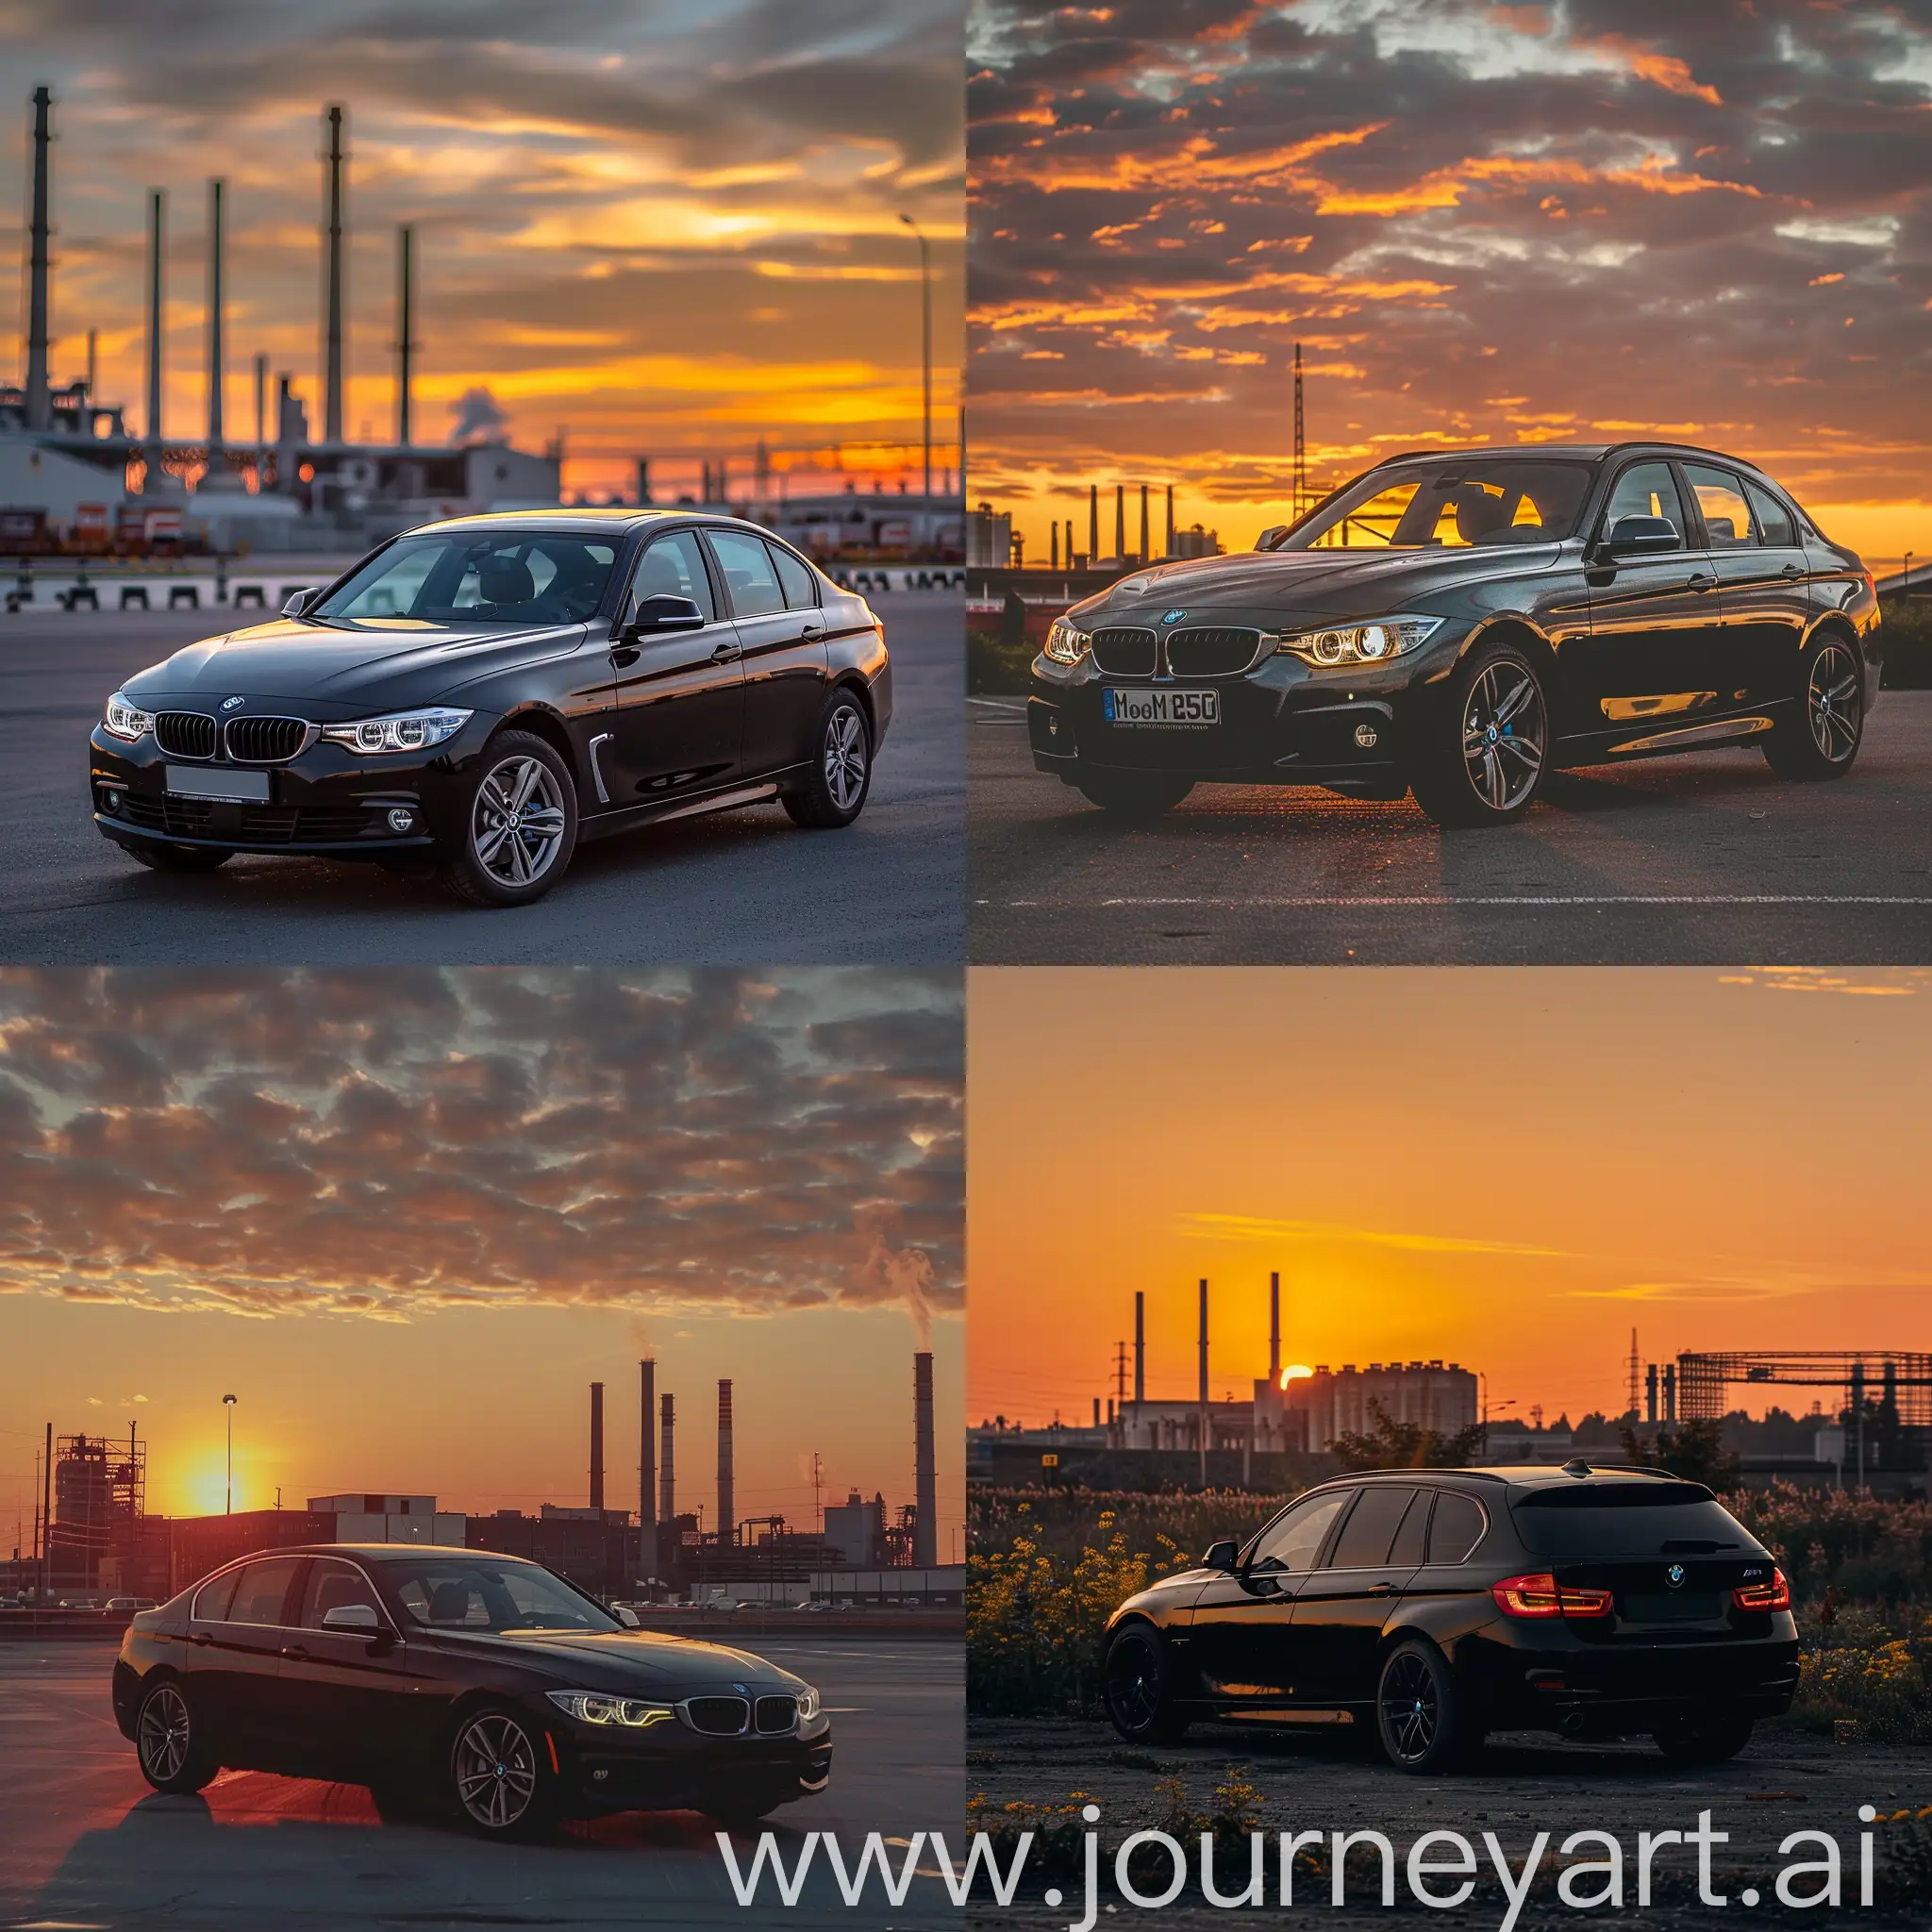 BMW-Touring-Car-Driving-Through-Industrial-Area-at-Sunset